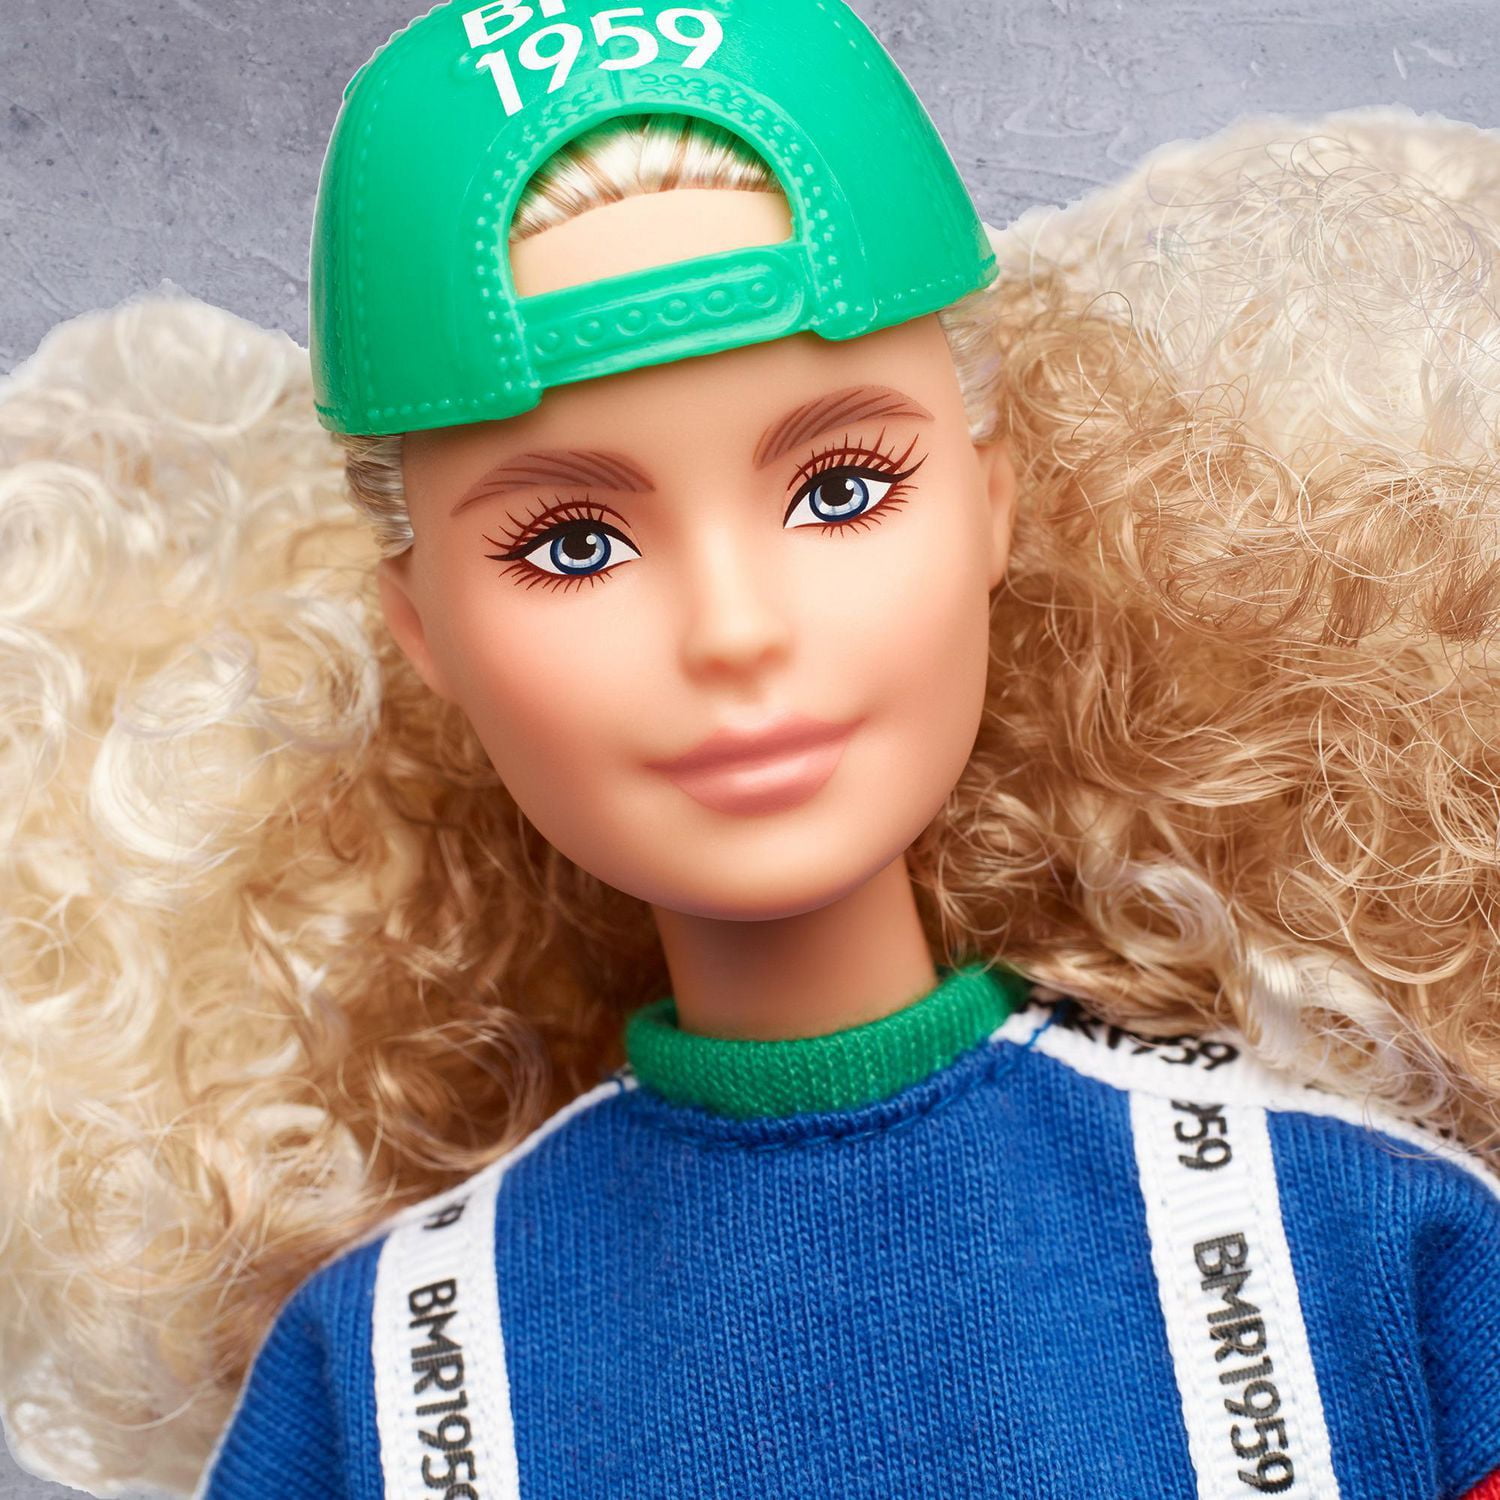 Barbie Looks Doll, Blonde Curly Hair, Color Block Outfit with